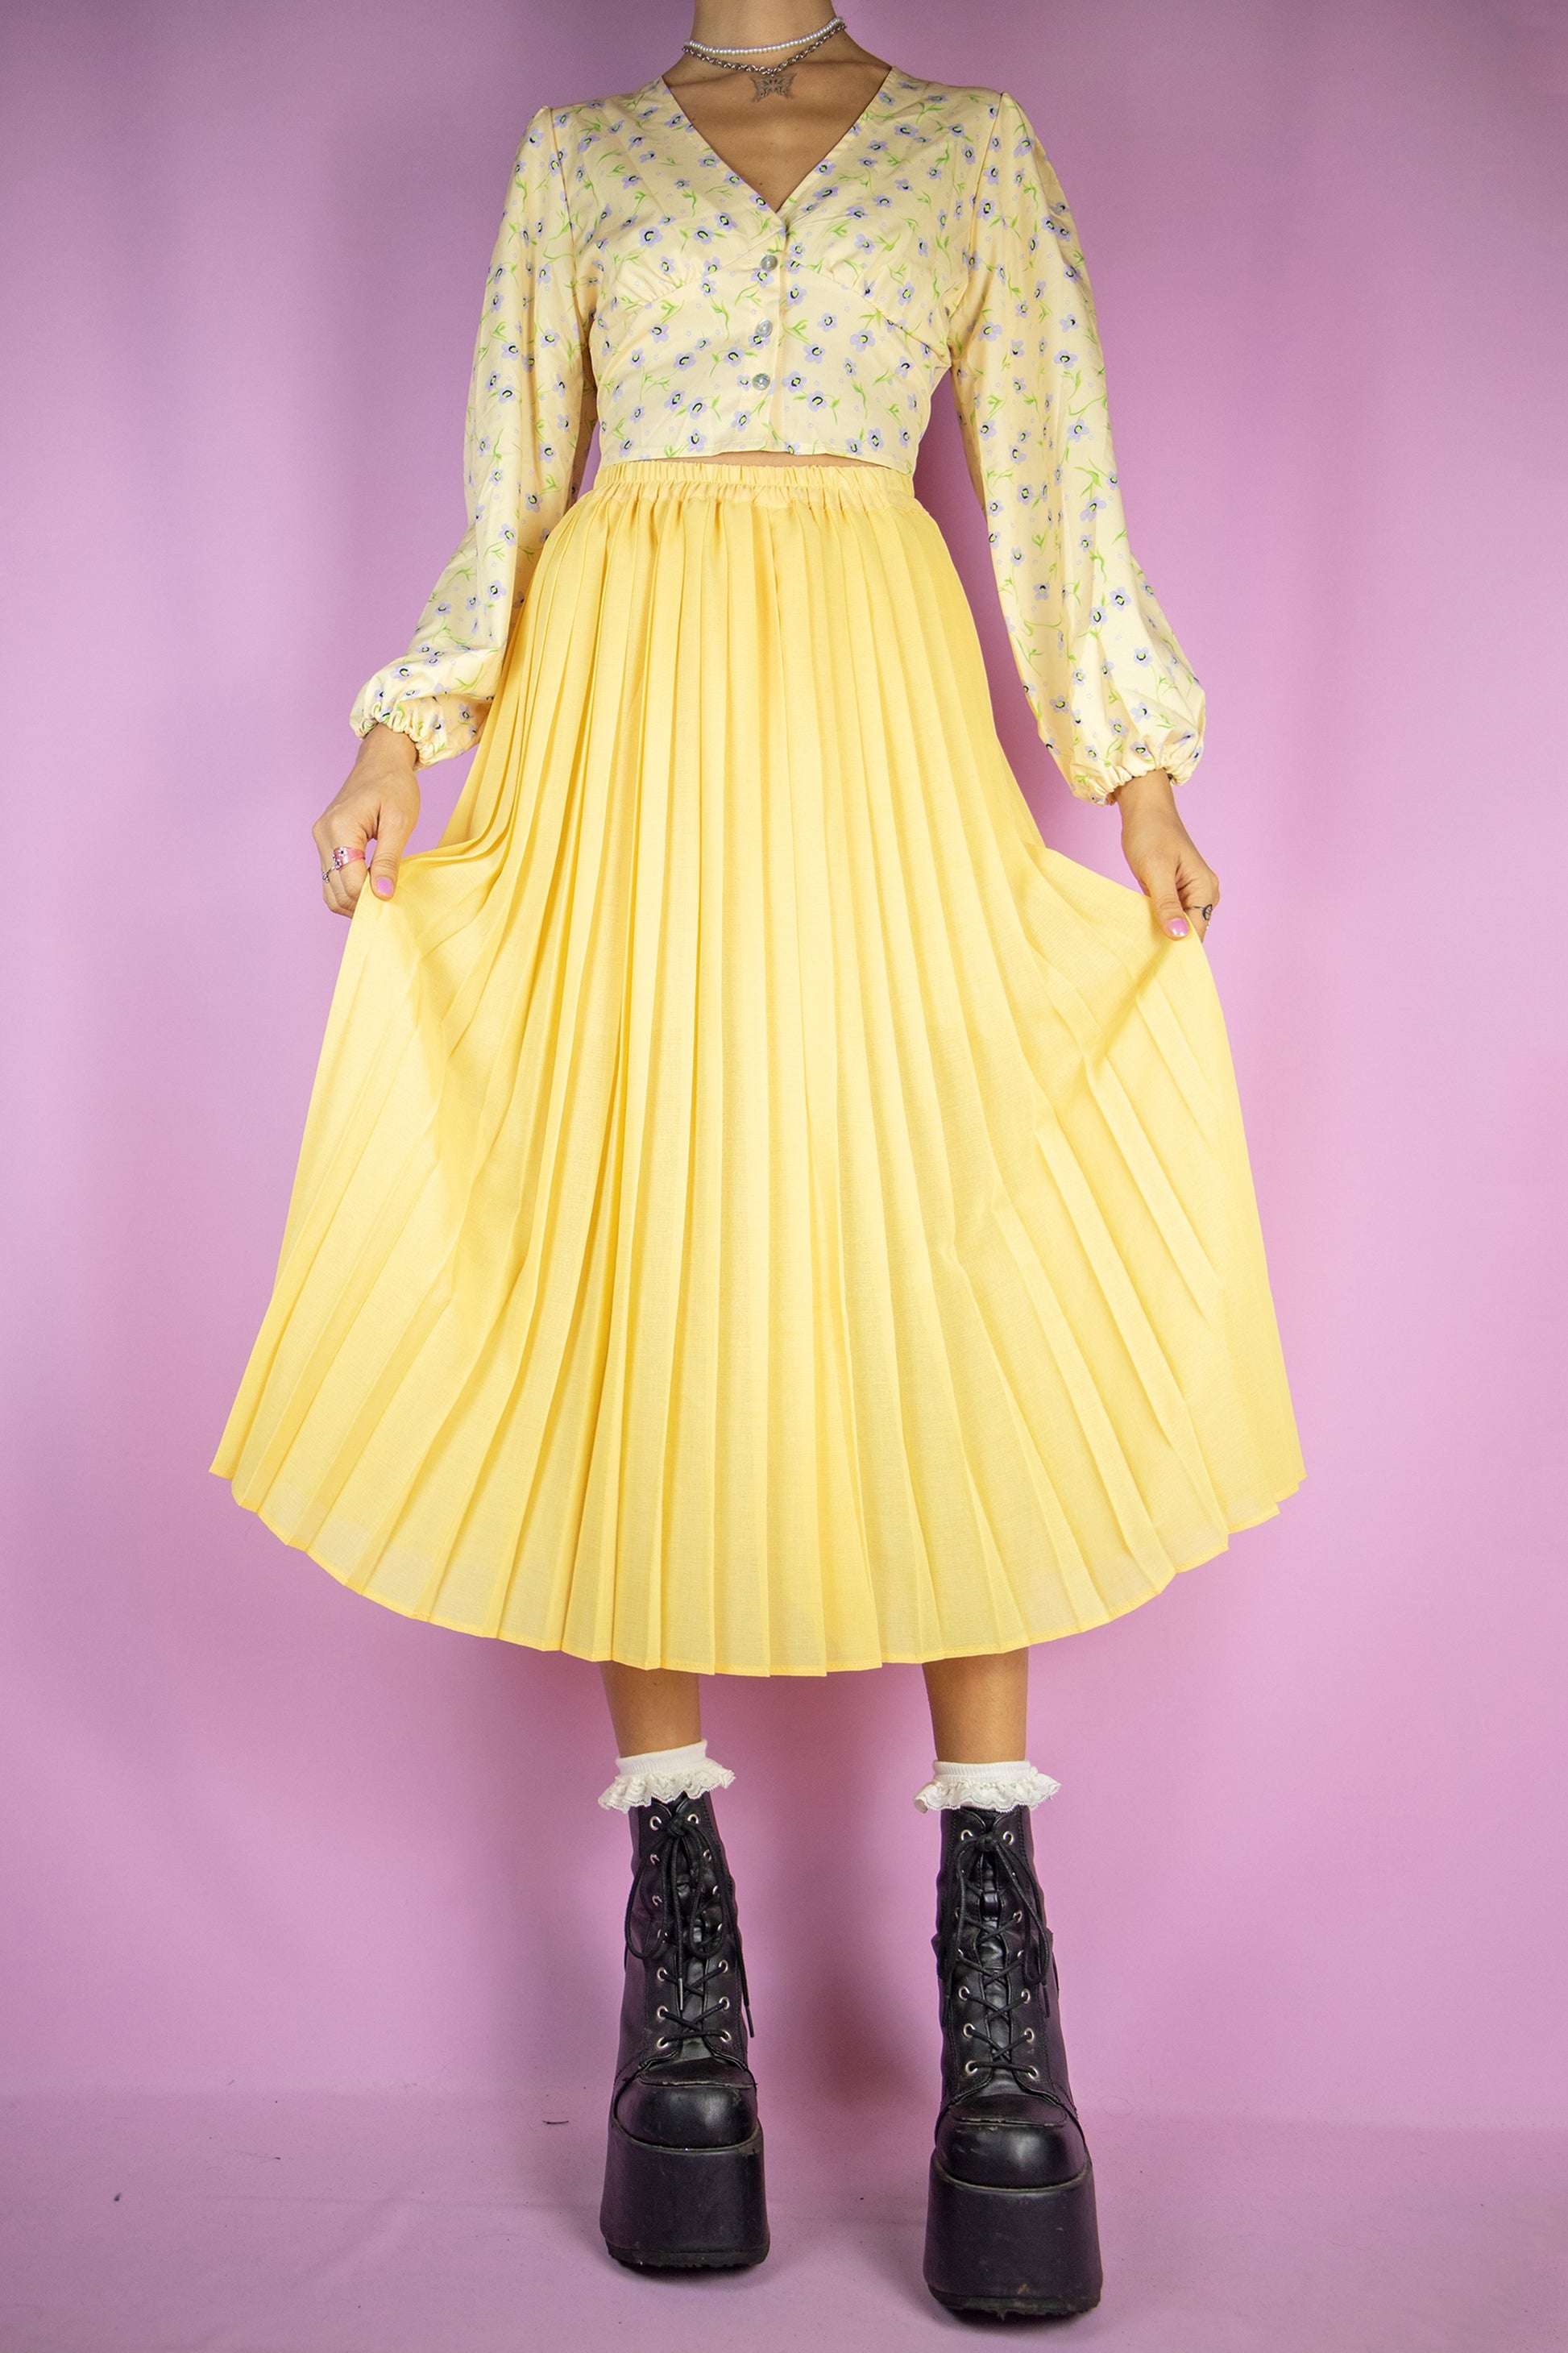 The Vintage 90s Yellow Pleated Midi Skirt is a long pleated yellow skirt with an elasticated waist. Lovely classic preppy 1990s. maxi skirt.